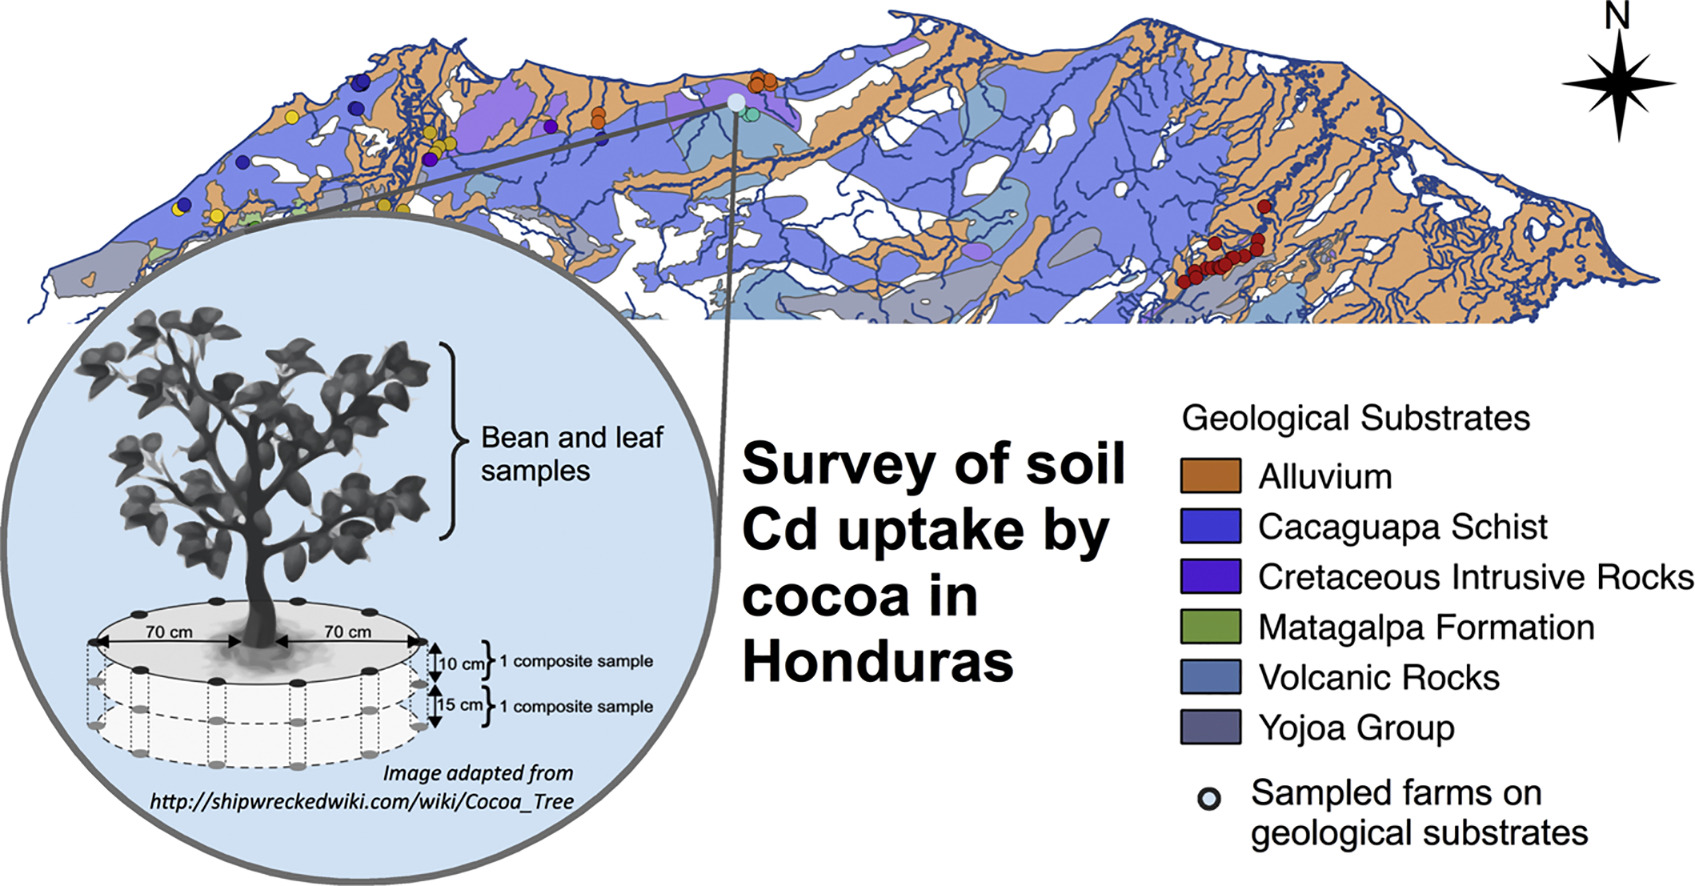 Enlarged view: Soil cadmium uptake by cocoa in Honduras